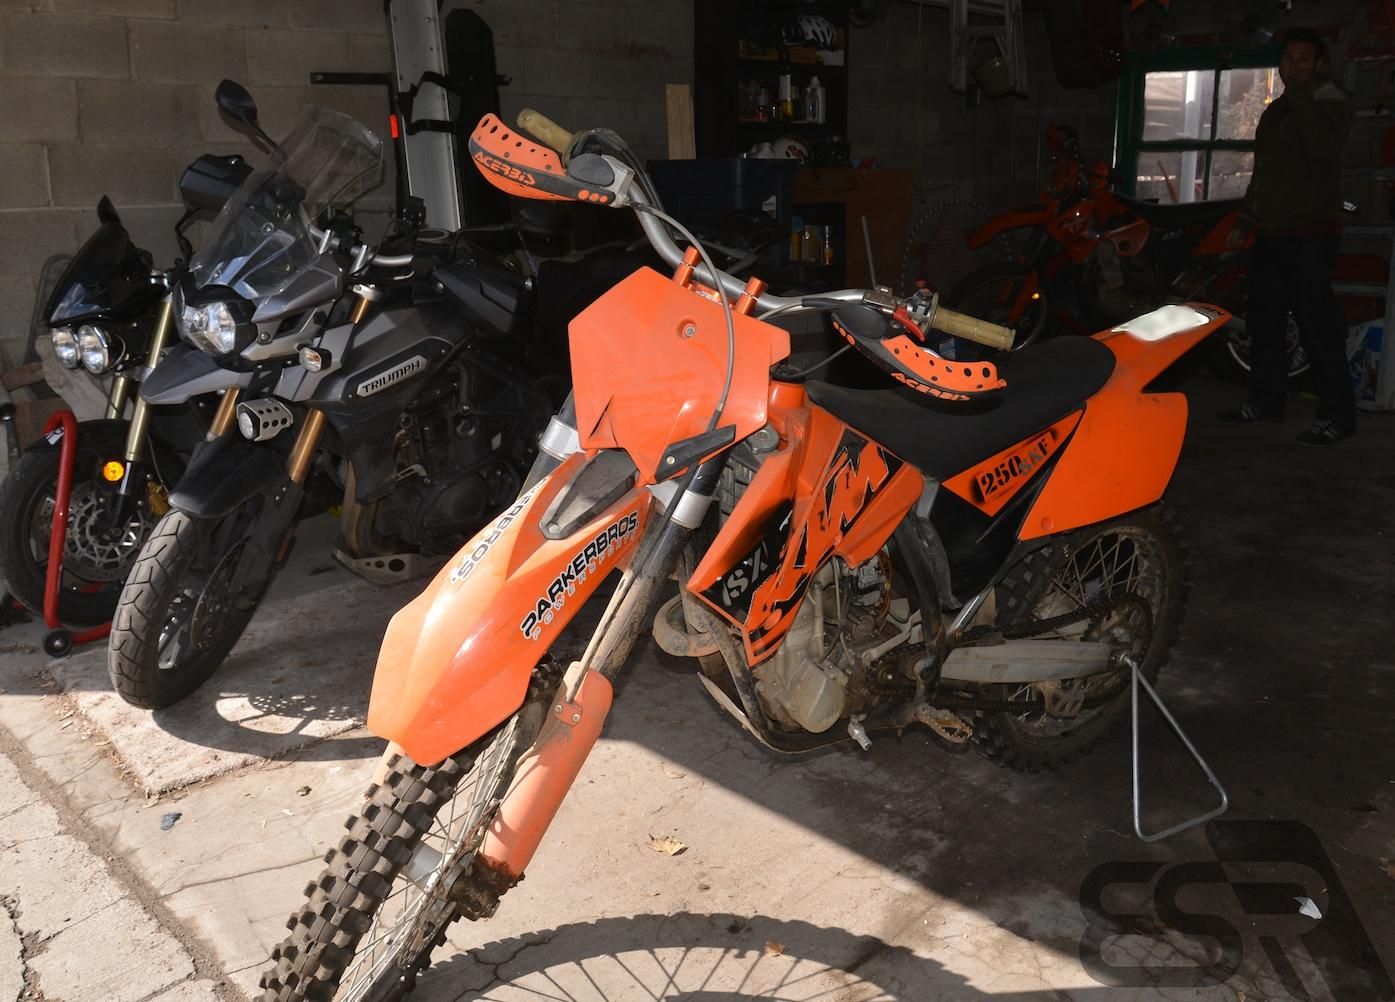 Selling the KTM 250 SFX